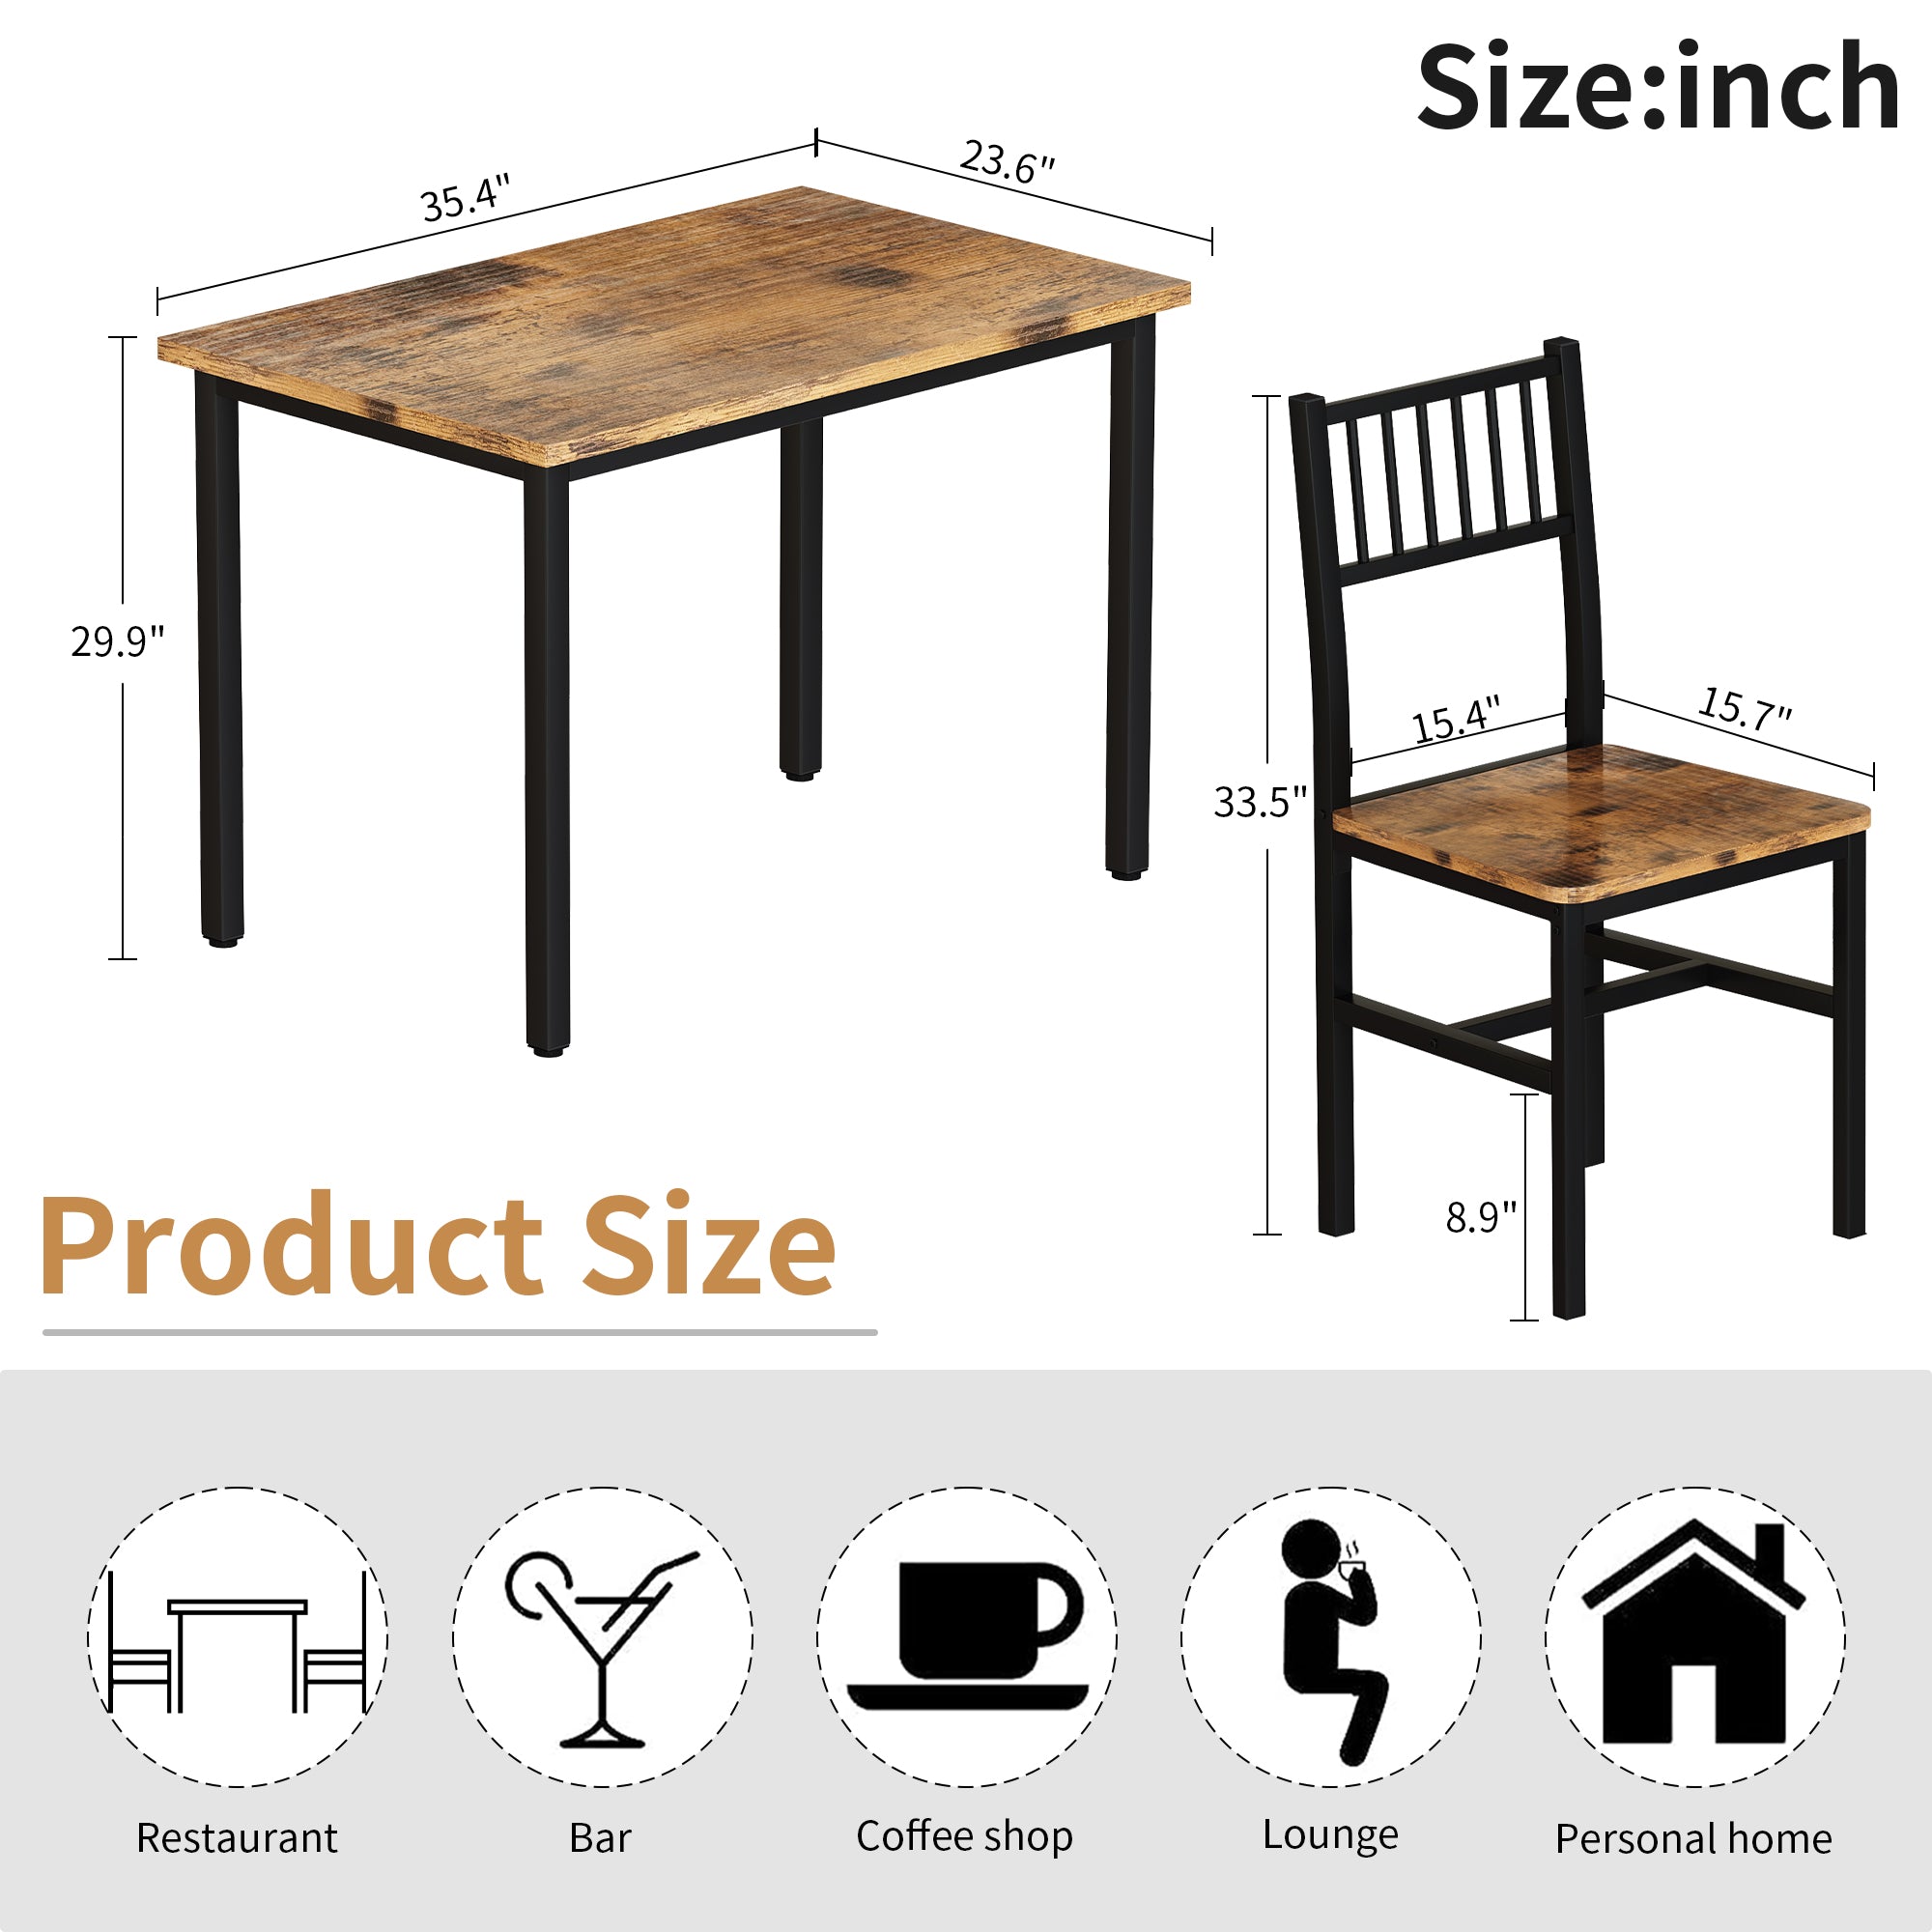 AWQM 3 Piece Dining Table Set, Small Industrial Kitchen Table and 2 Chairs, Kitchen Breakfast Dining Table Set, Breakfast Table Set for Dining Room, Living Room, Apartment, Small Space, Brown